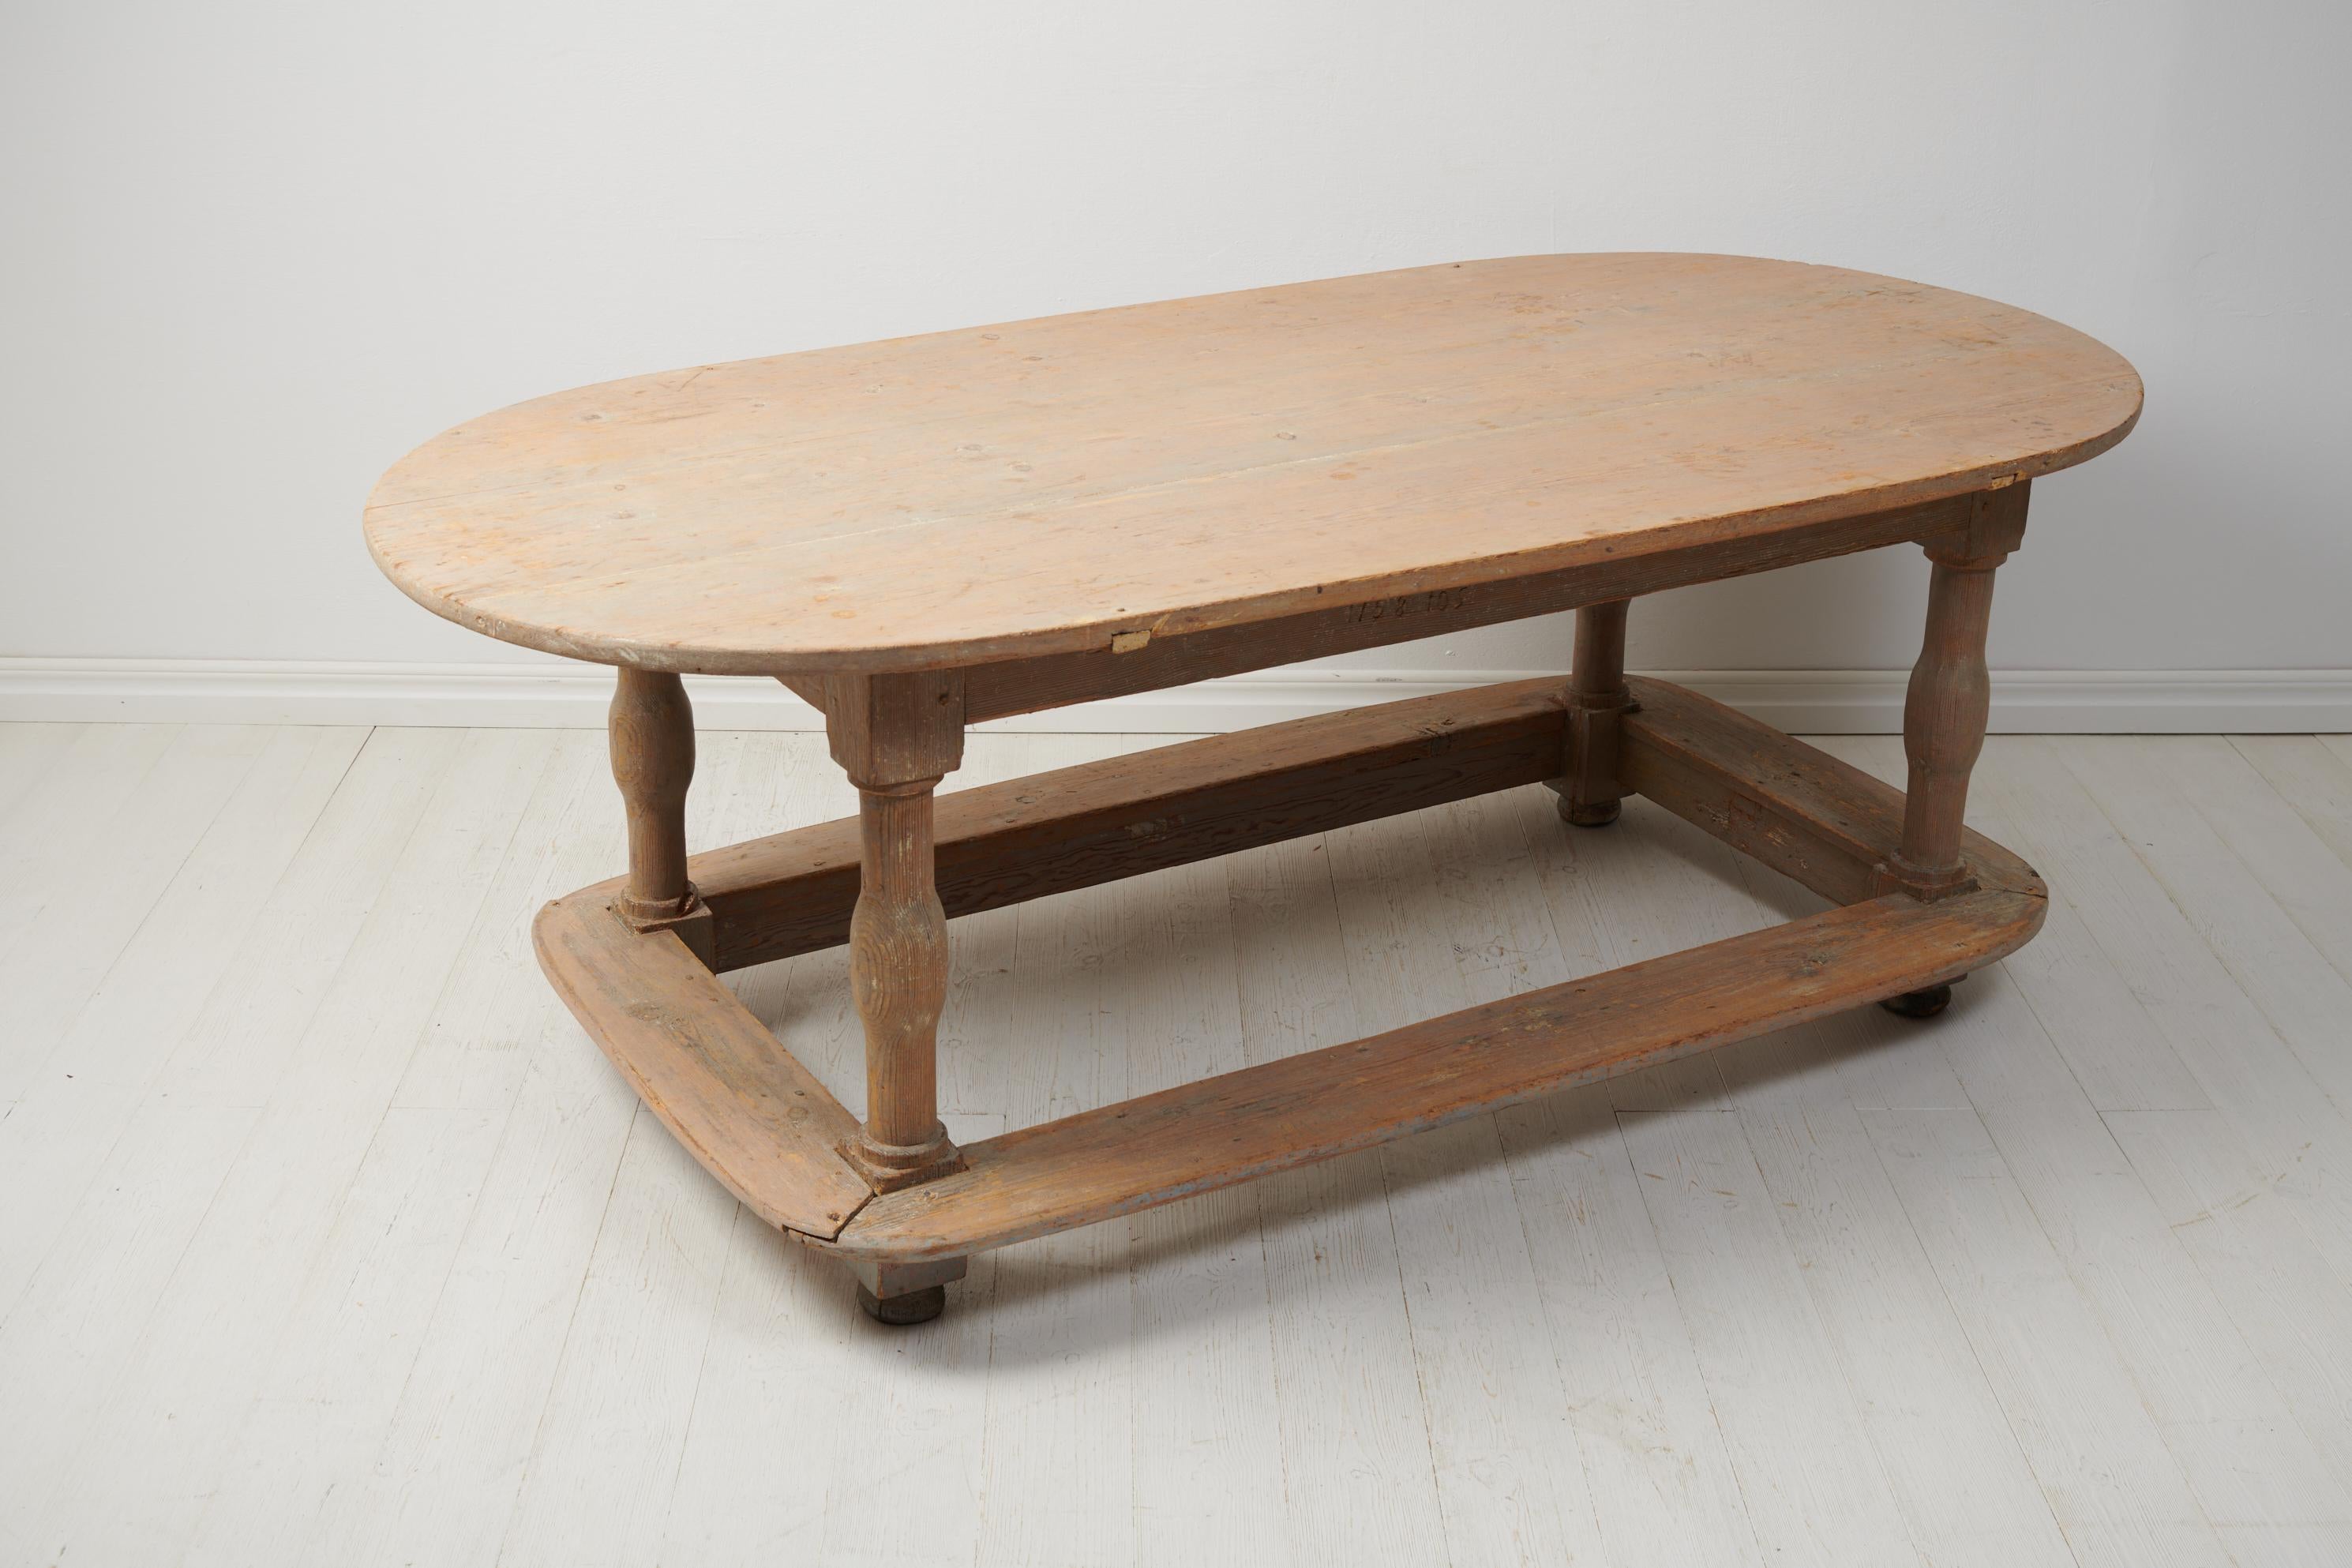 Rare Genuine Swedish Pine Baroque Centre Table Dated 1758 In Good Condition For Sale In Kramfors, SE